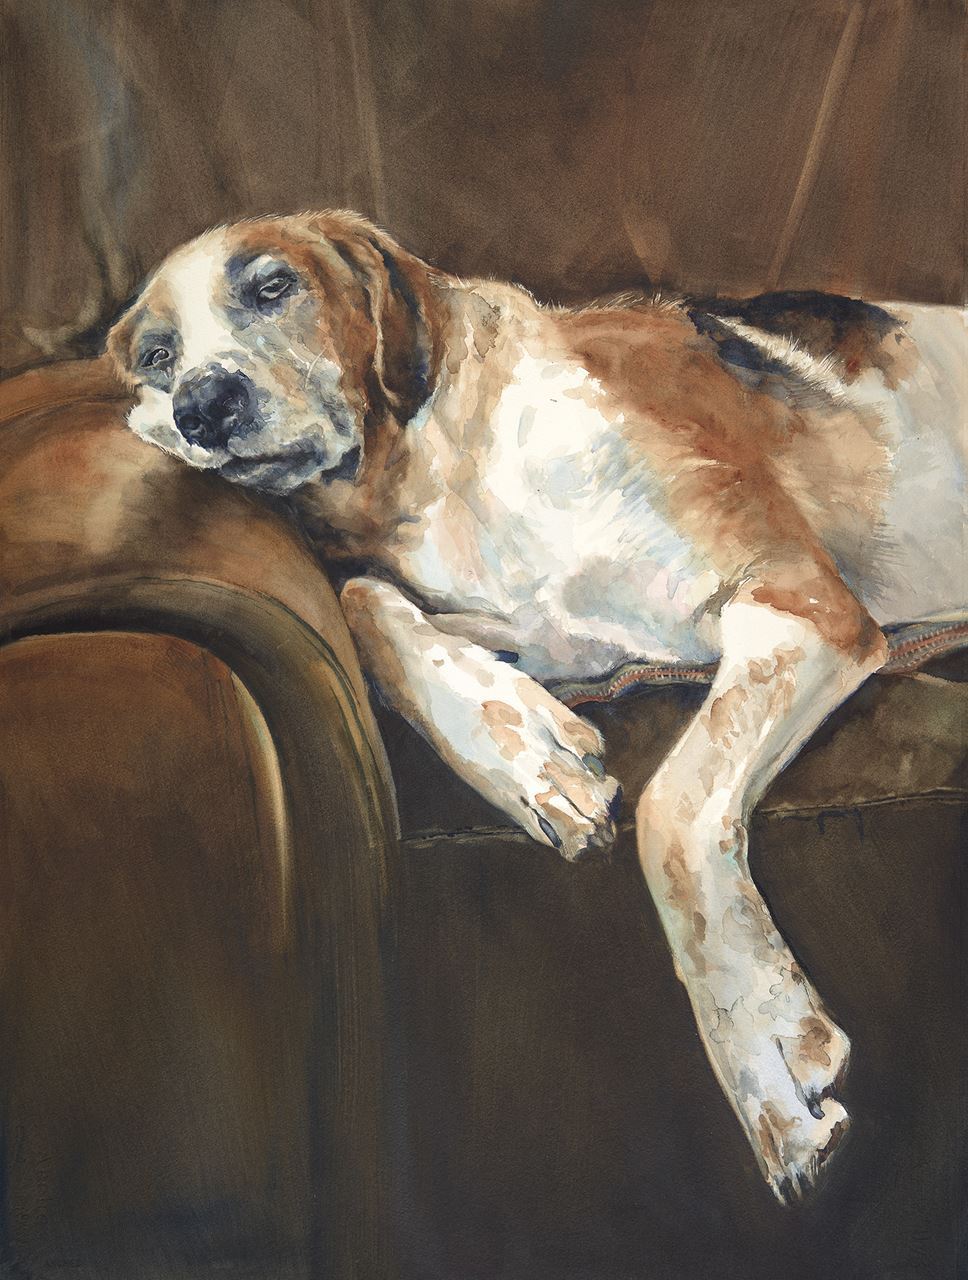 Somebody Bring me a Biscuit, watermedia painting by S. Lund Levy, a hound dog sleeping on a sofa in shades of brown